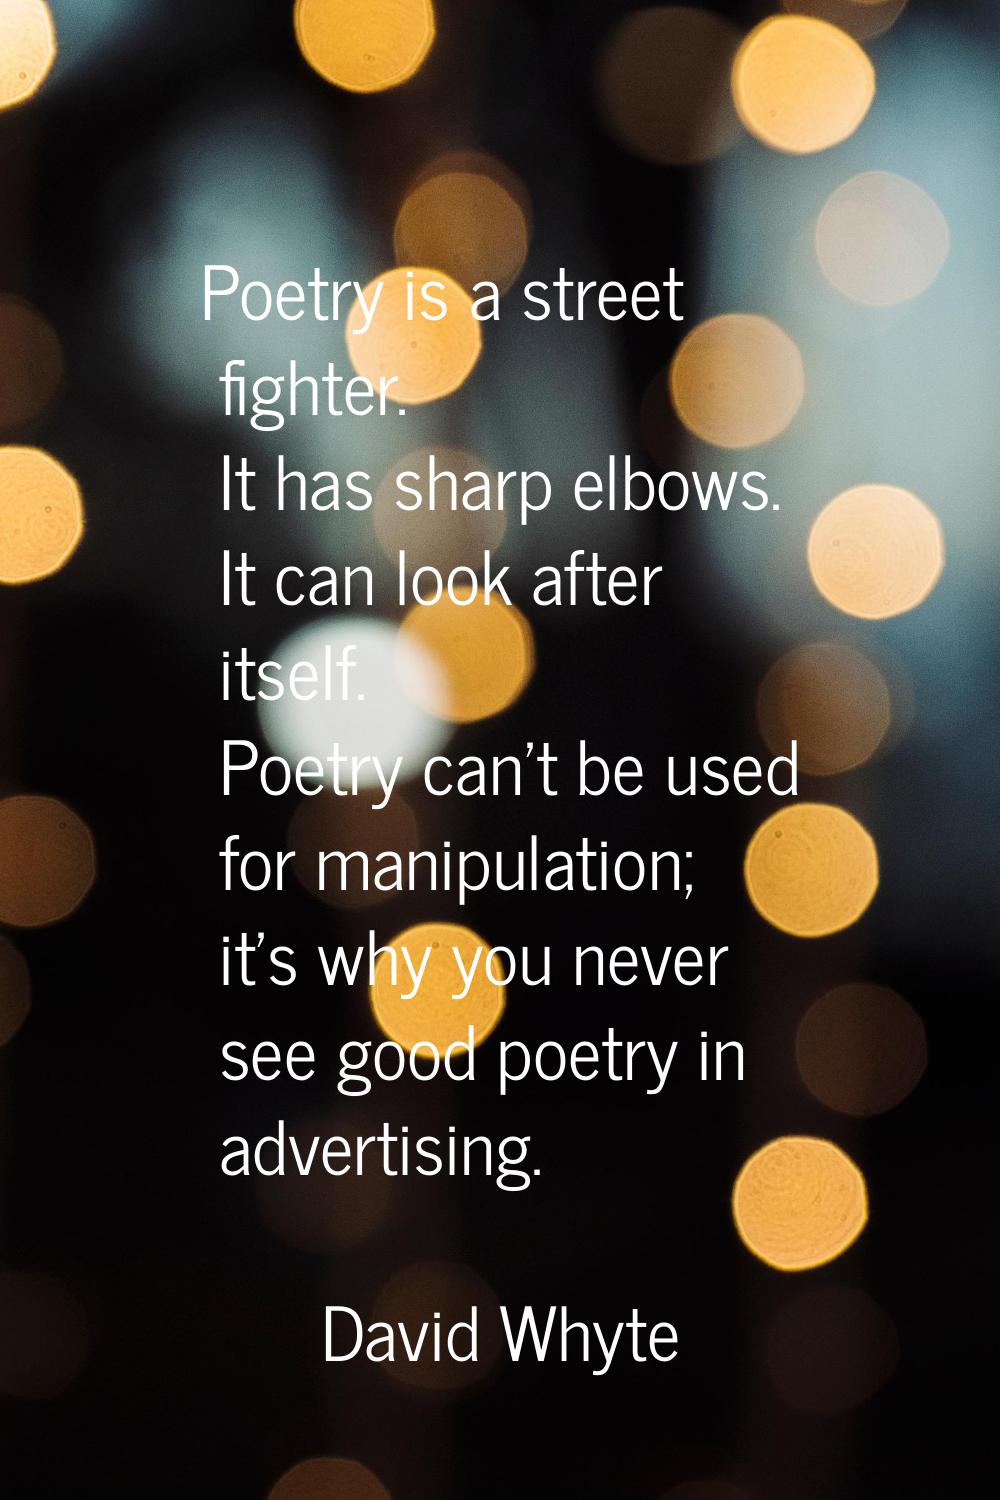 Poetry is a street fighter. It has sharp elbows. It can look after itself. Poetry can't be used for